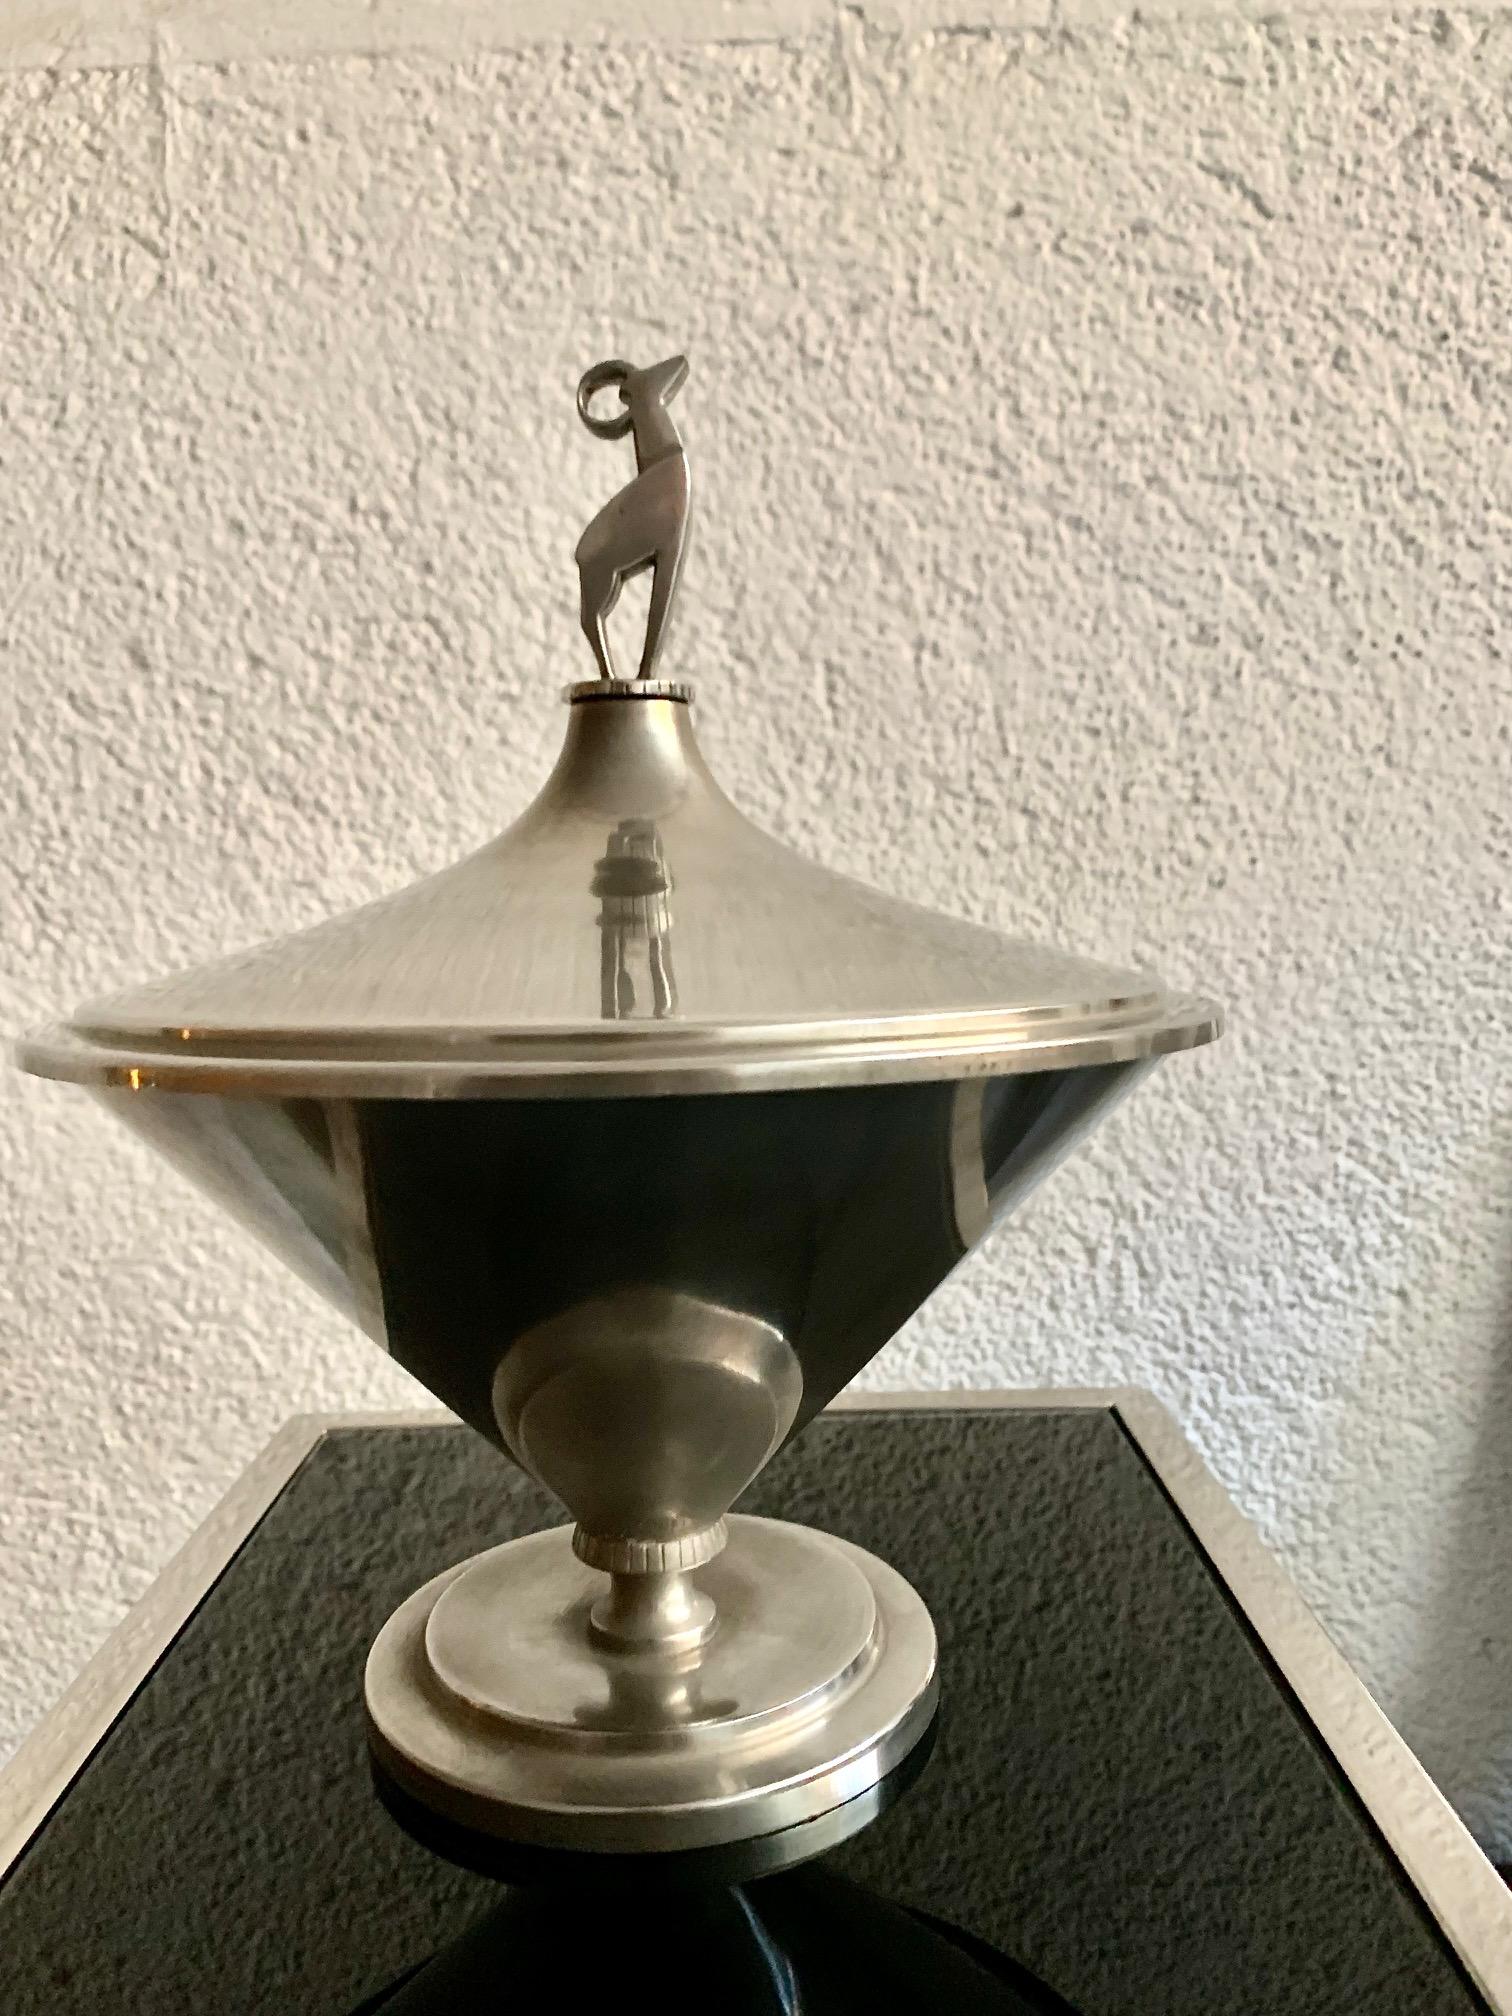 Swedish Art Deco pewtwr vase or urn, it is a special piece with a base from which the vase starts in a conical shape, it has a lid topped by a figure that represents a deer-like animal, Signed on the bottom by Tyringe Konsthanverk.